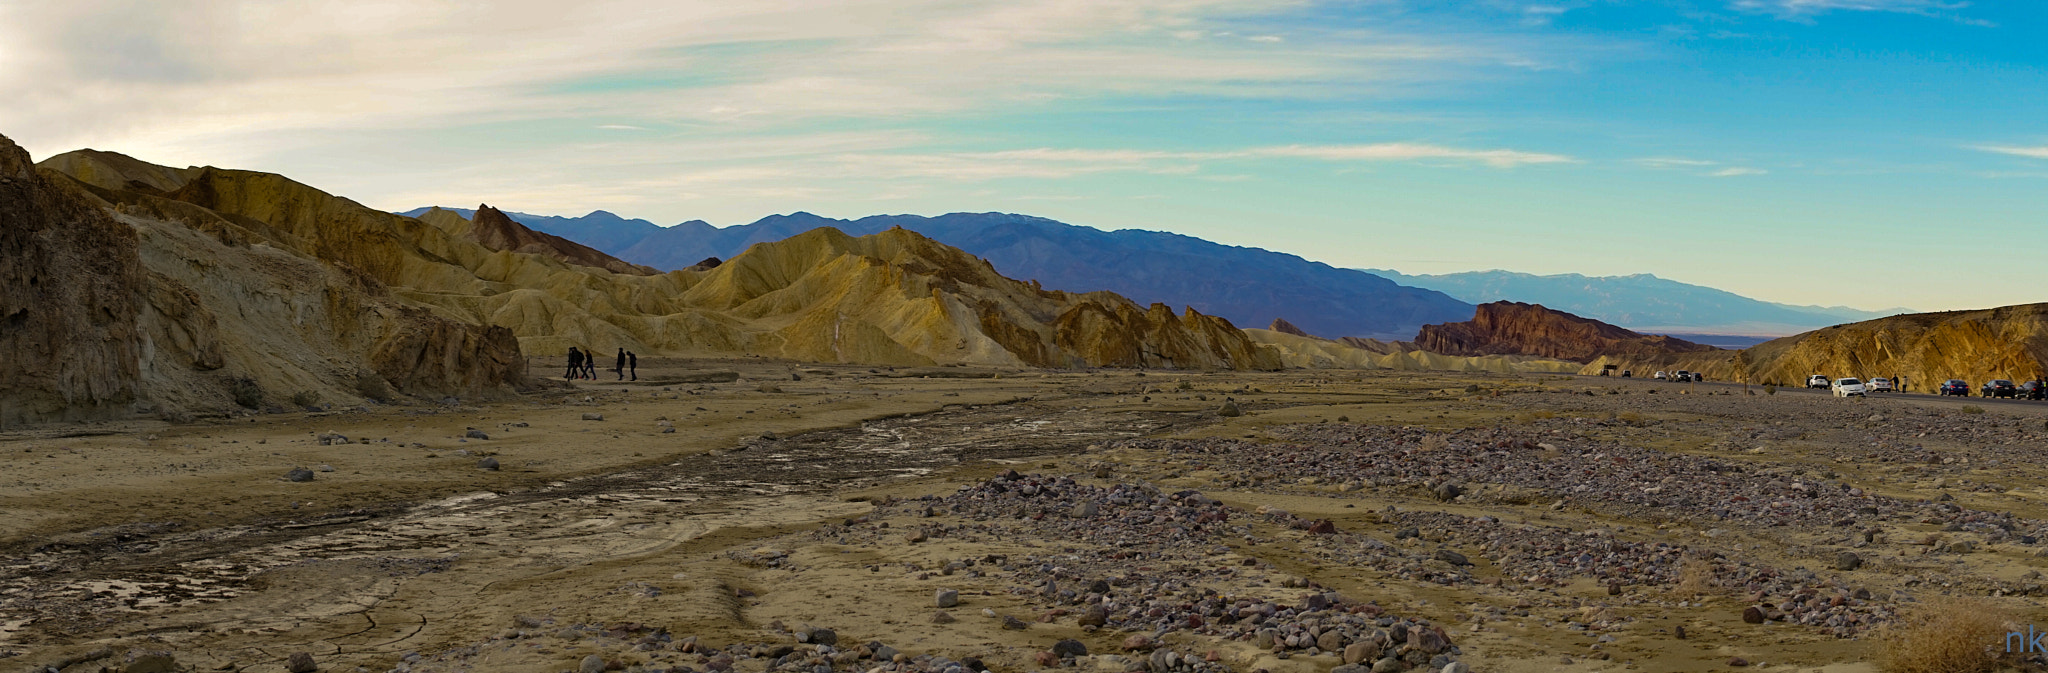 Sony a7 sample photo. Death valley photography